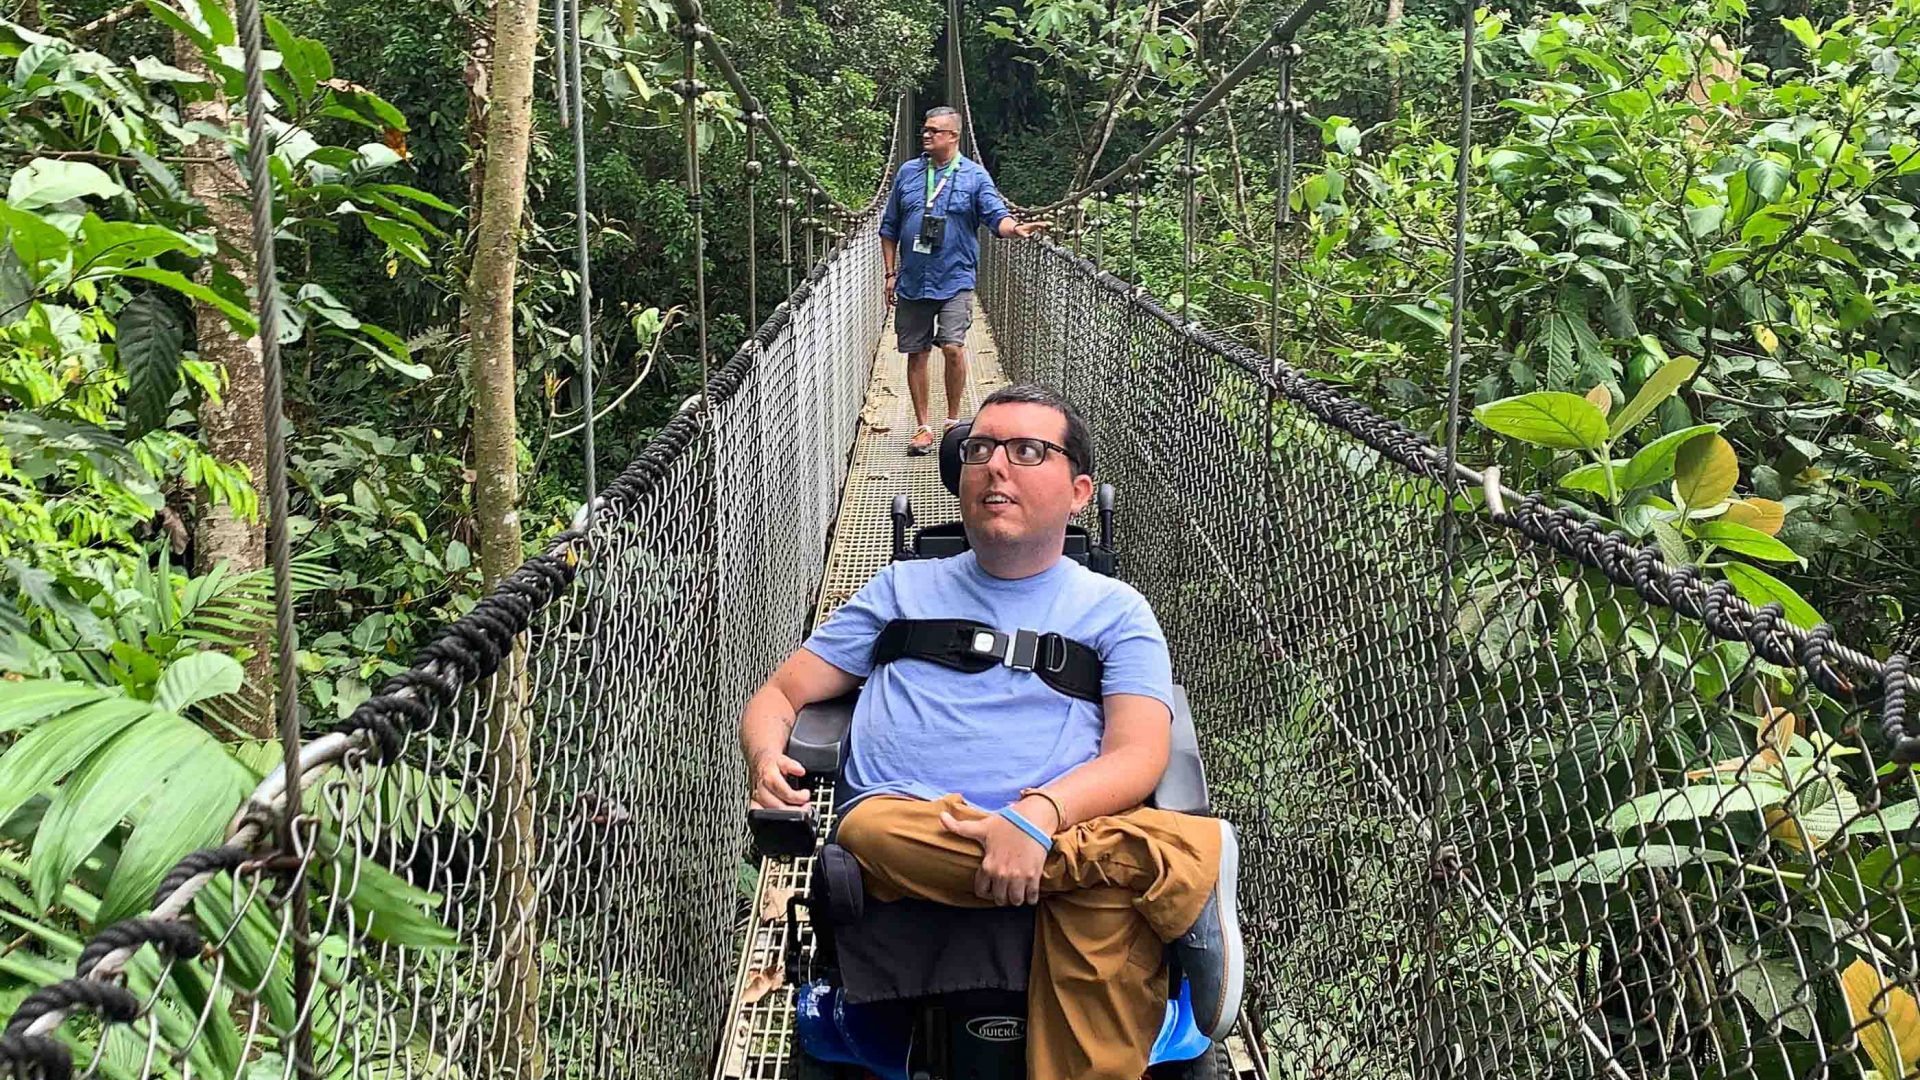 Cory Lee crossing a bridge while on his travels.